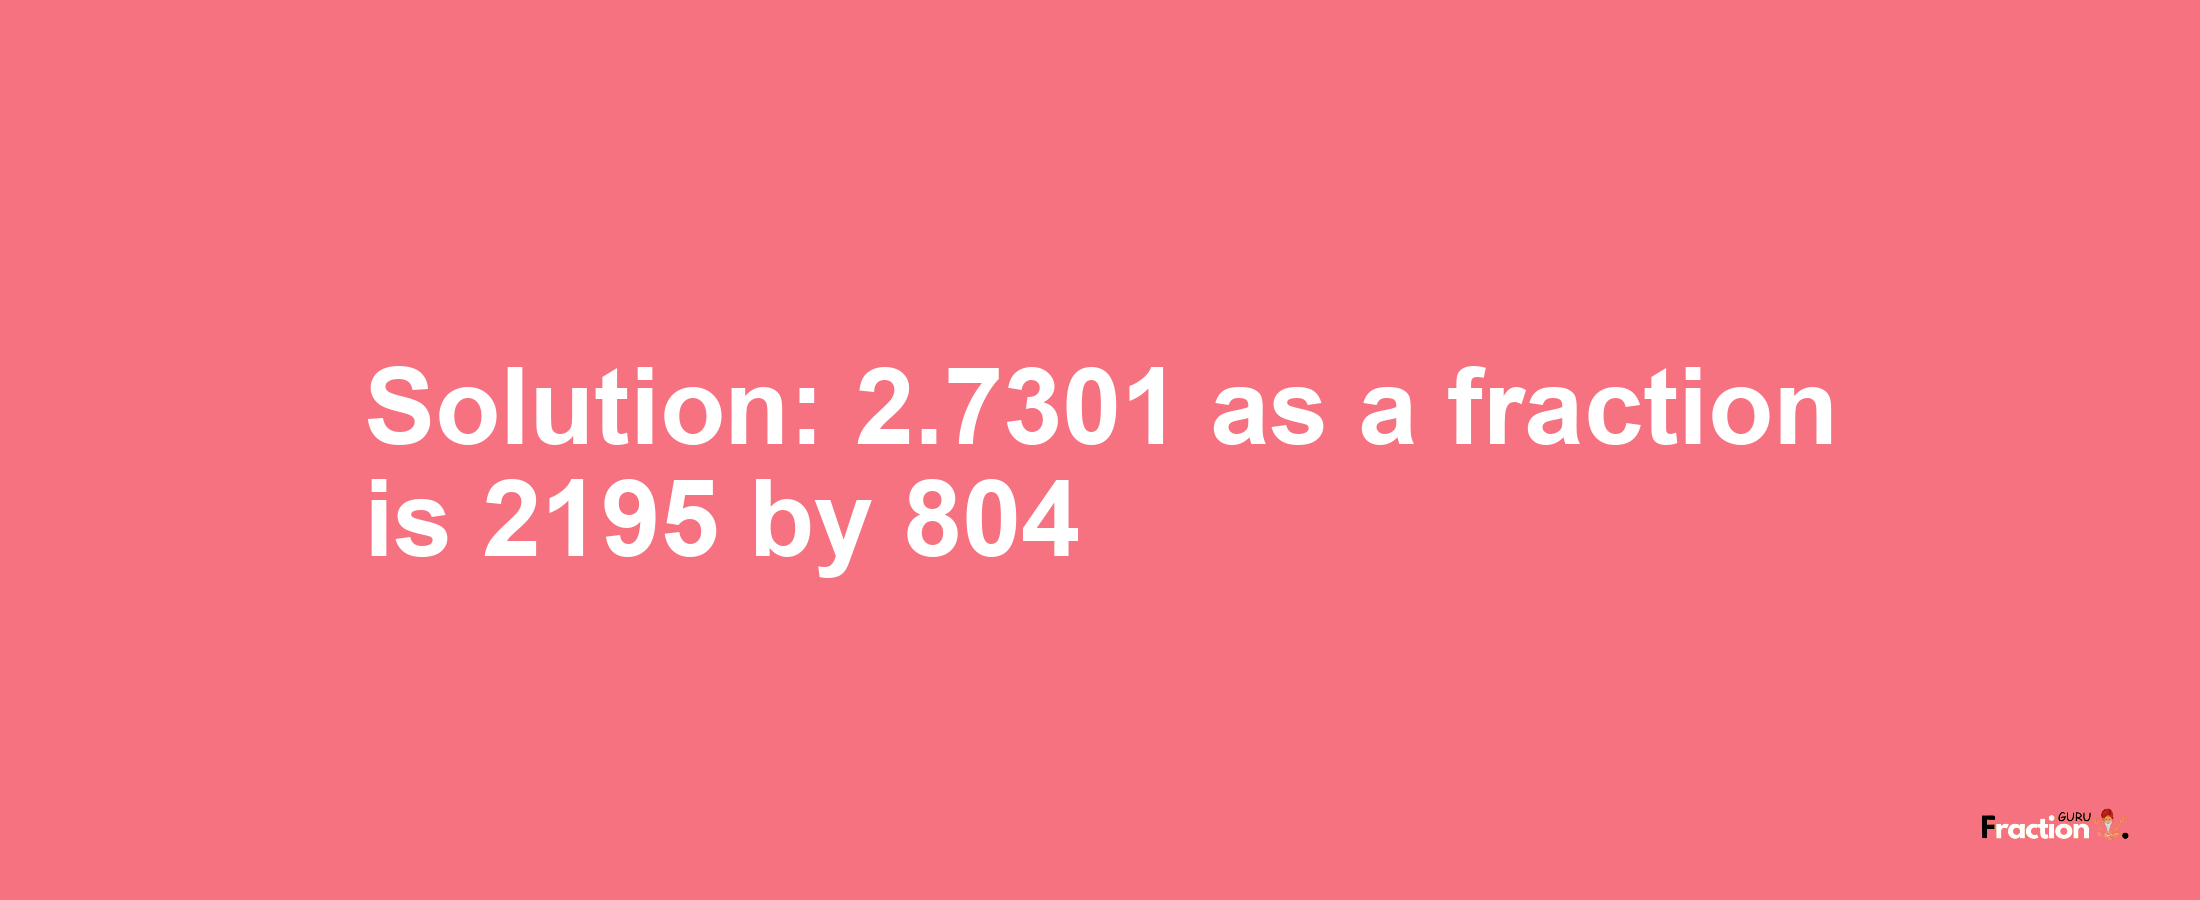 Solution:2.7301 as a fraction is 2195/804